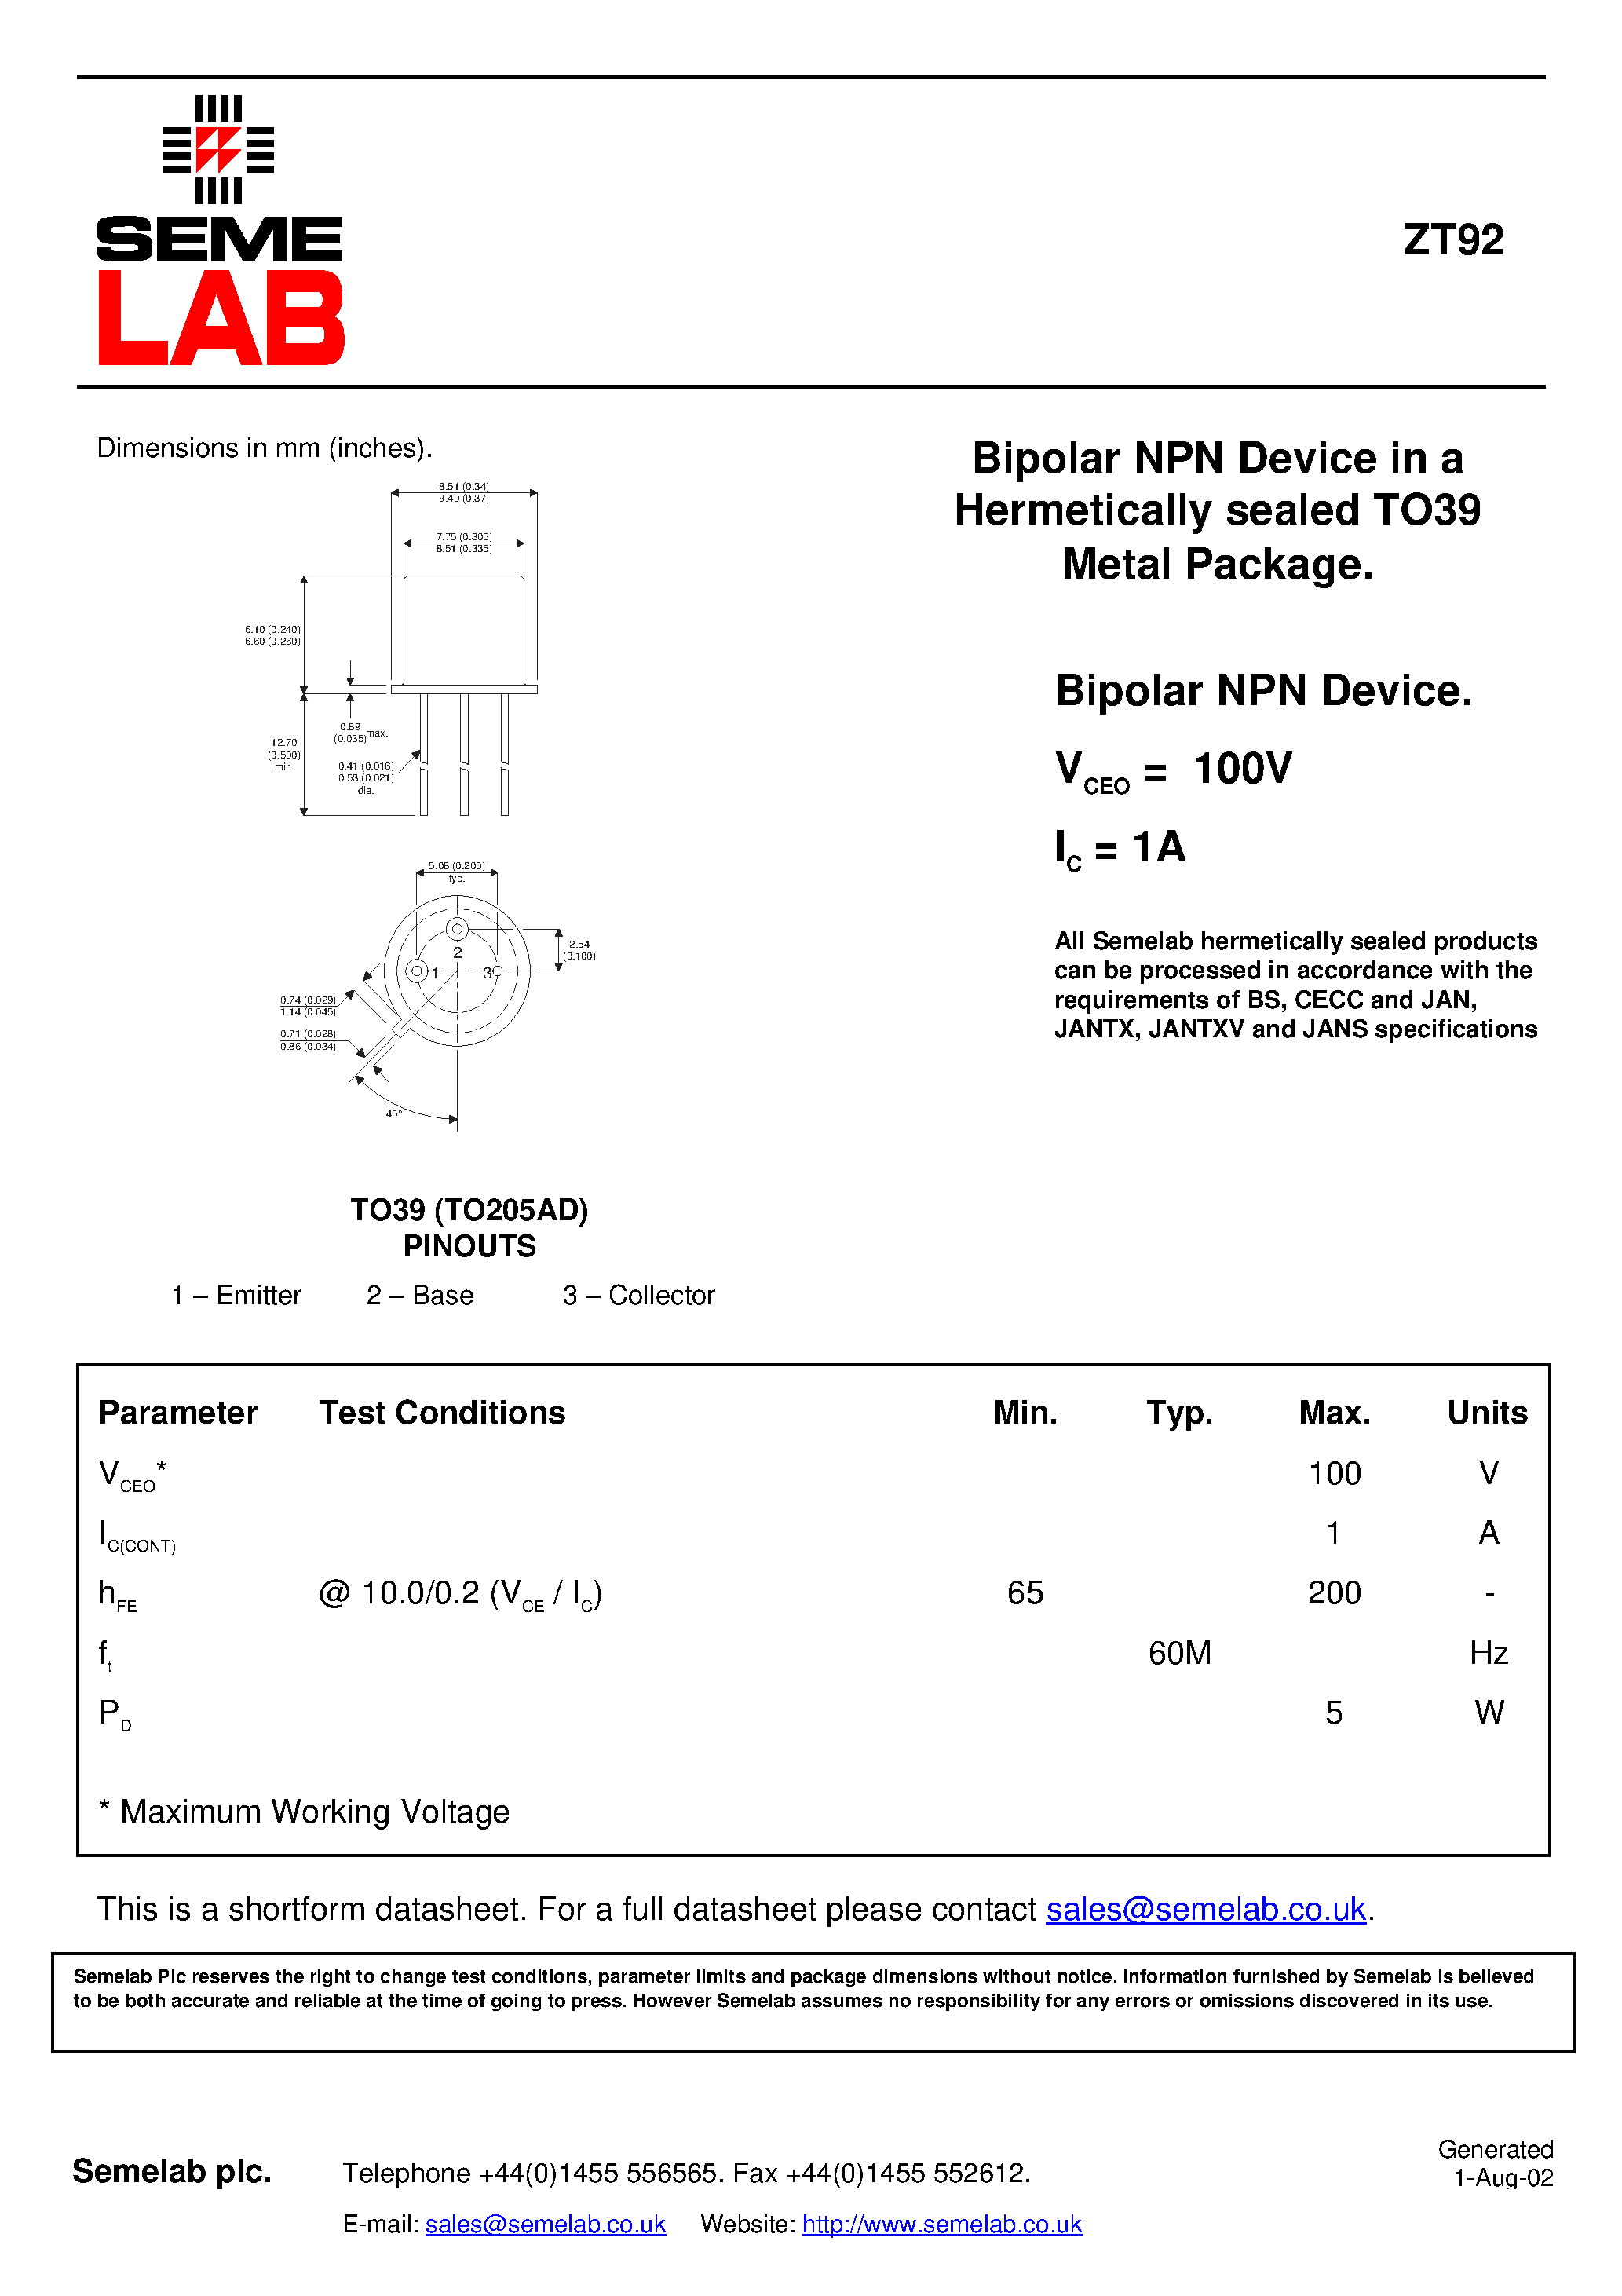 Datasheet ZT92 - Bipolar NPN Device in a Hermetically sealed TO39 Metal Package page 1